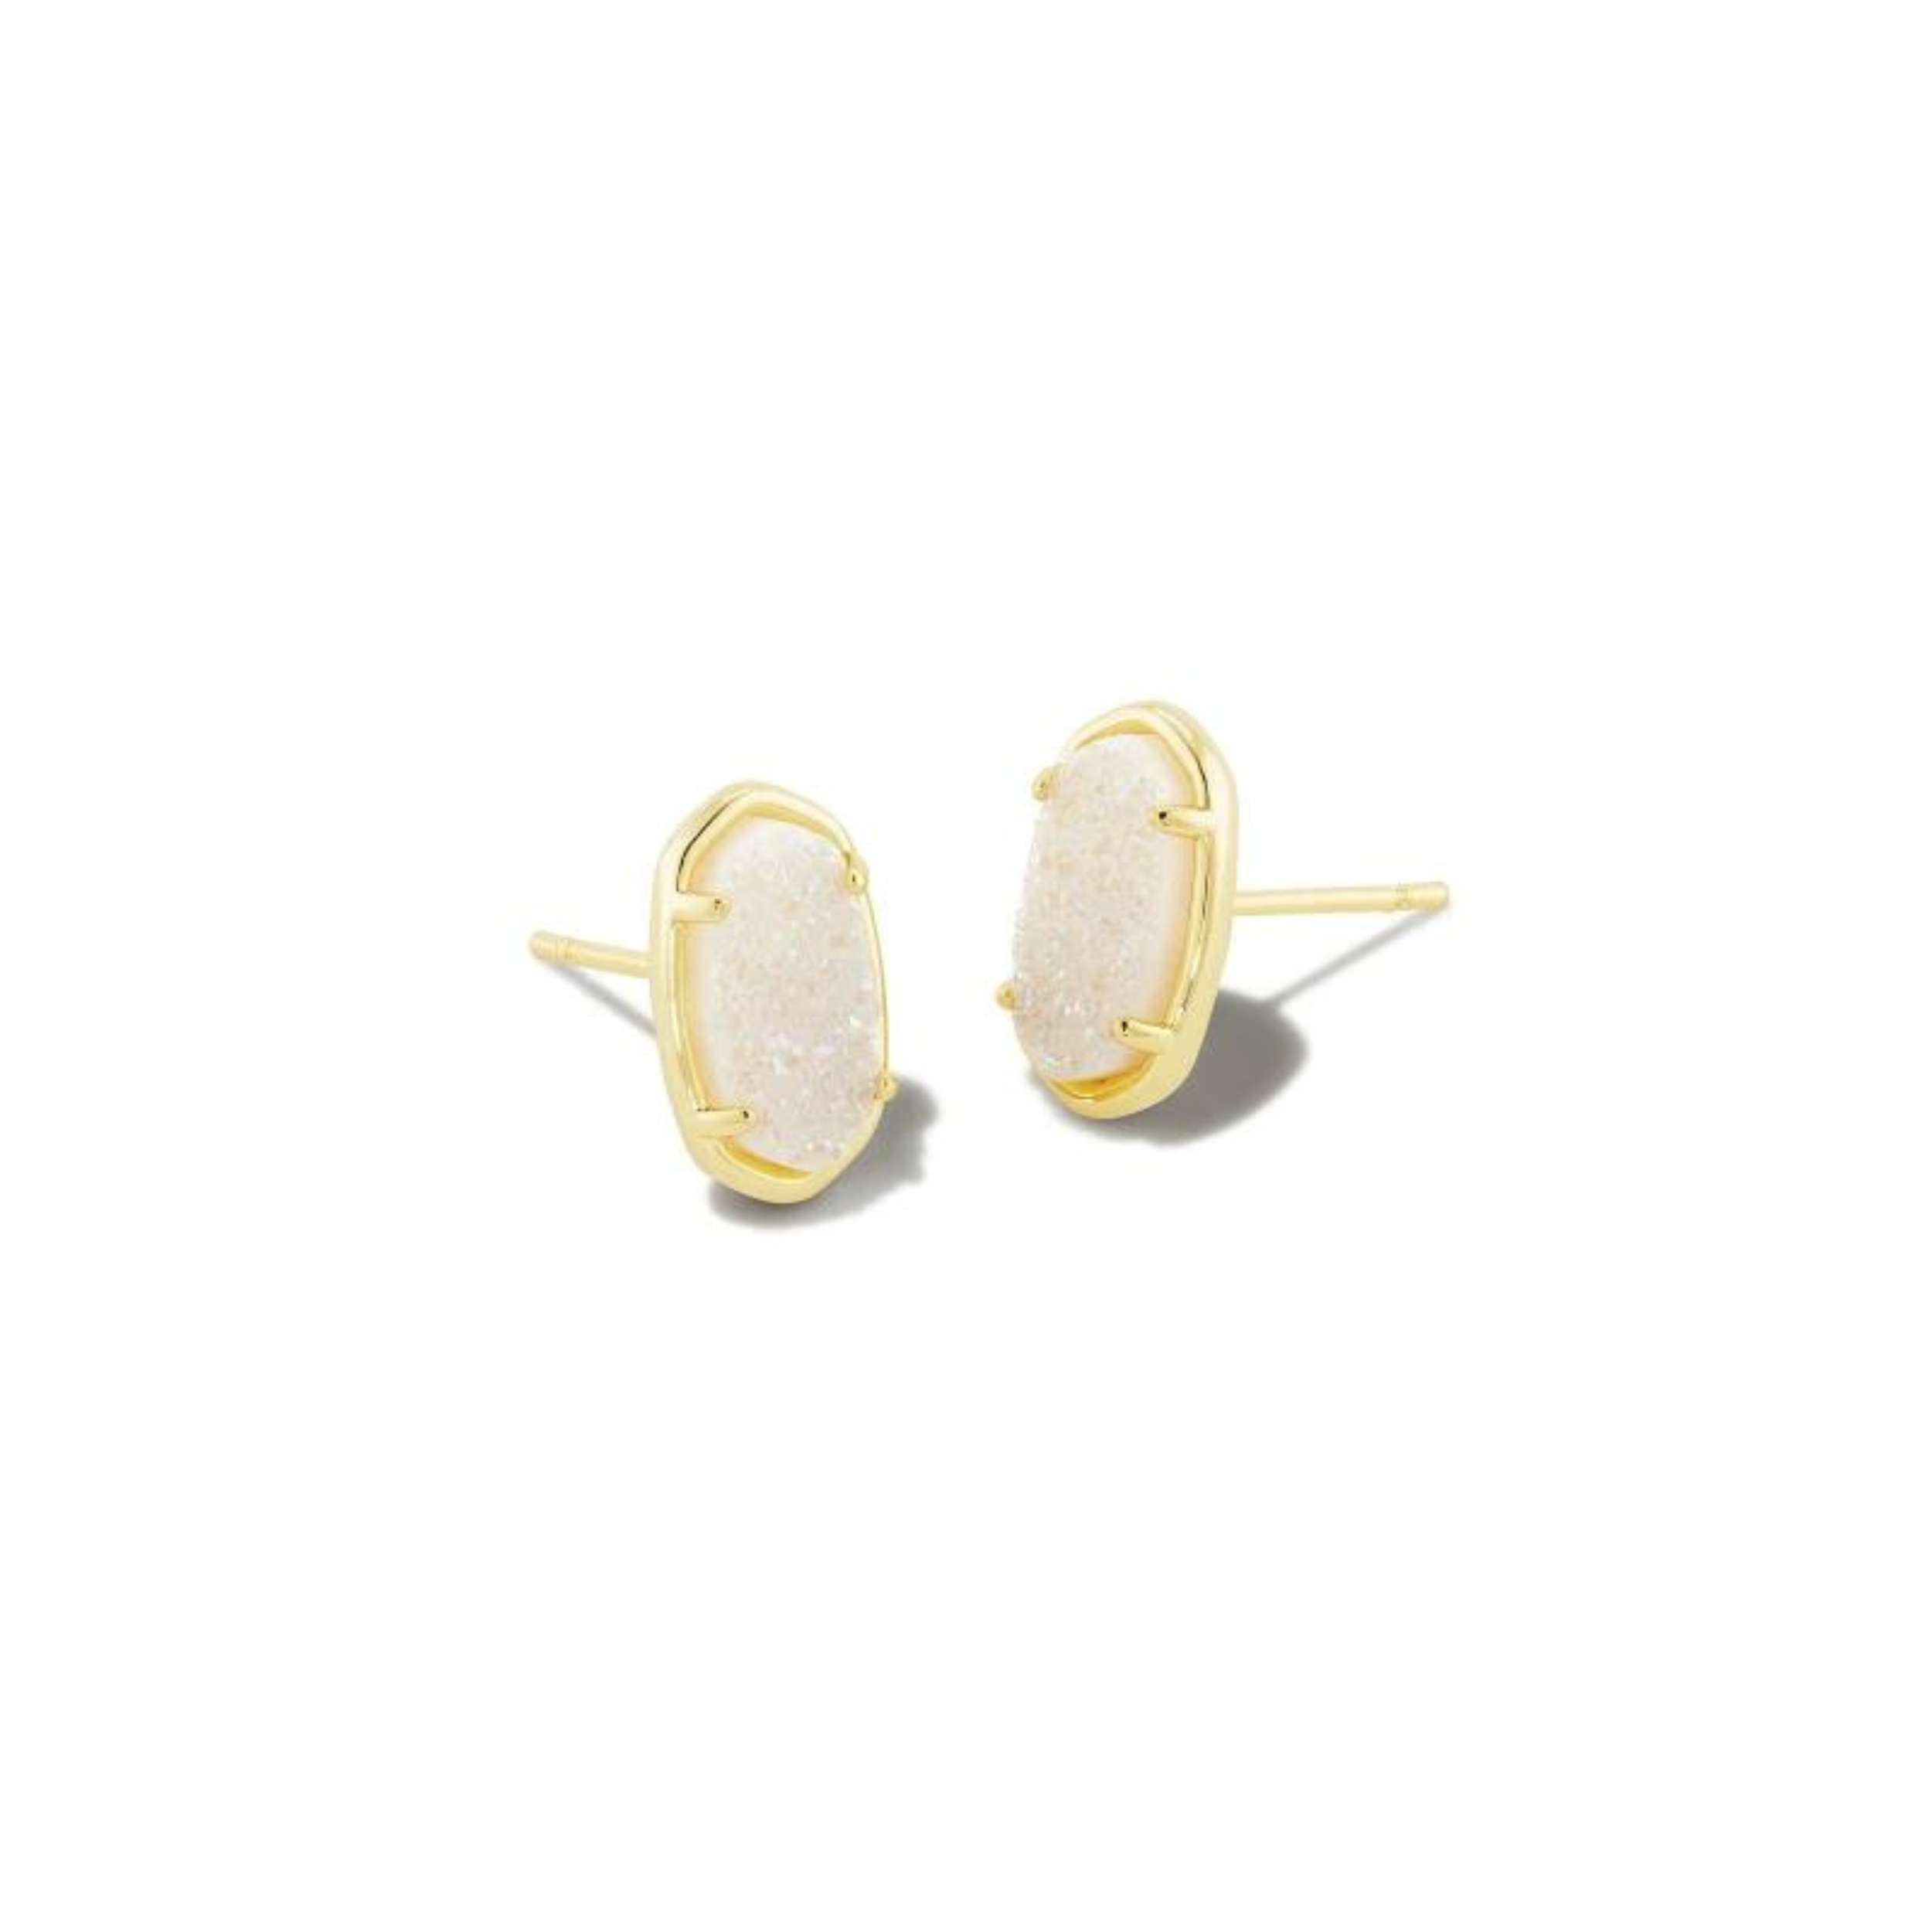 Gold stud earring with iridescent stone pictured on a white background.